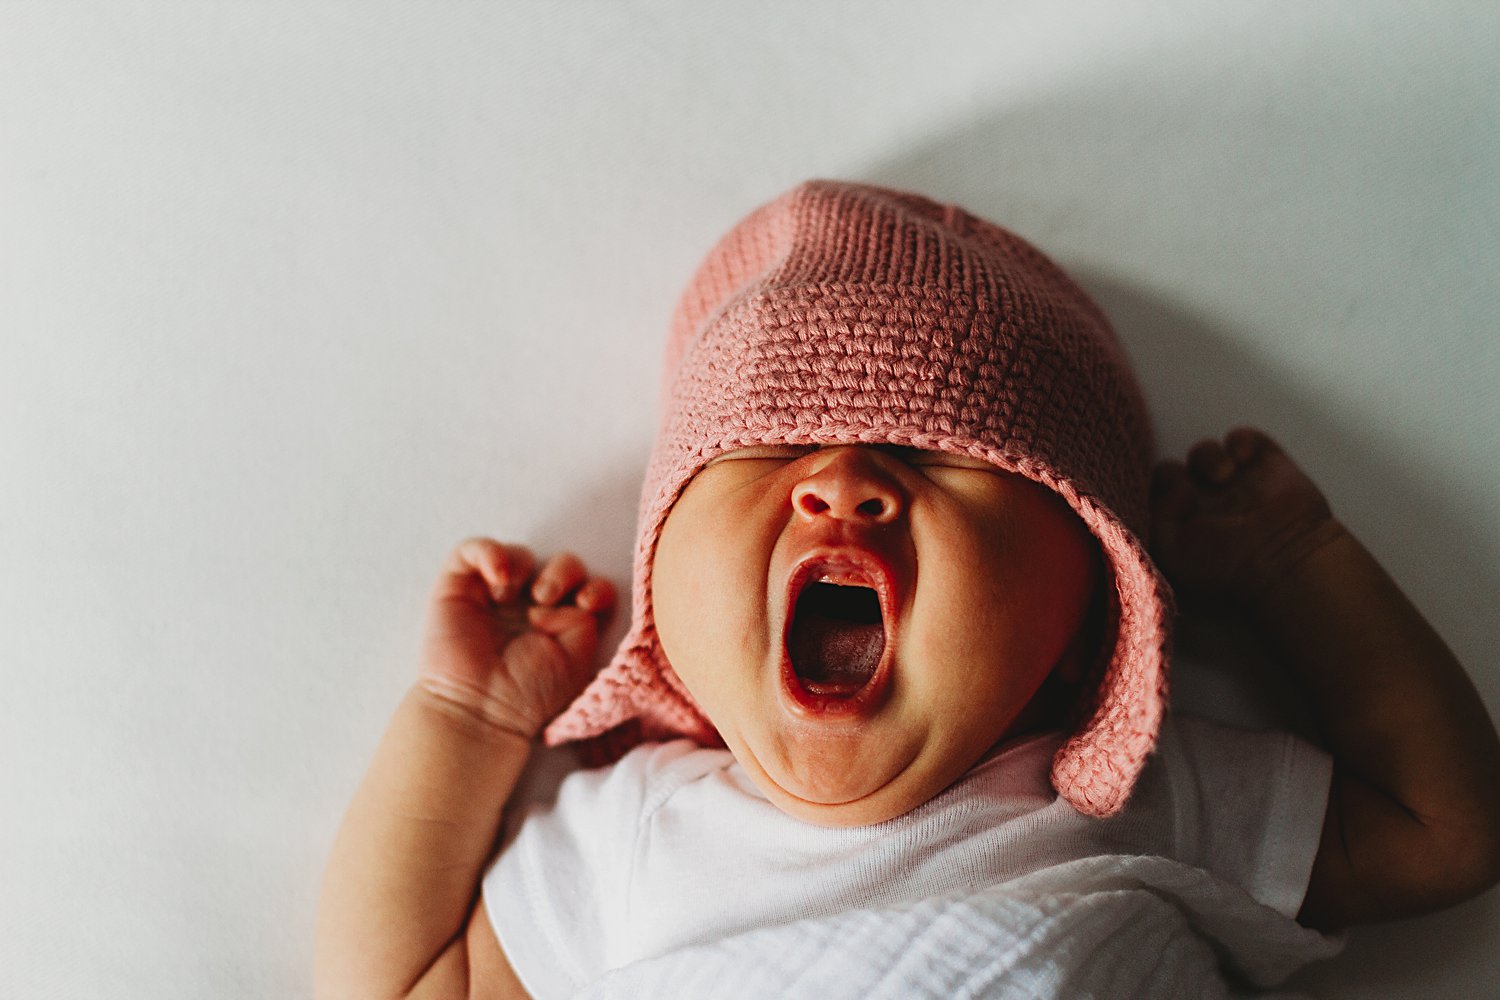 Newborn baby yawning very wide in swaddle and hat